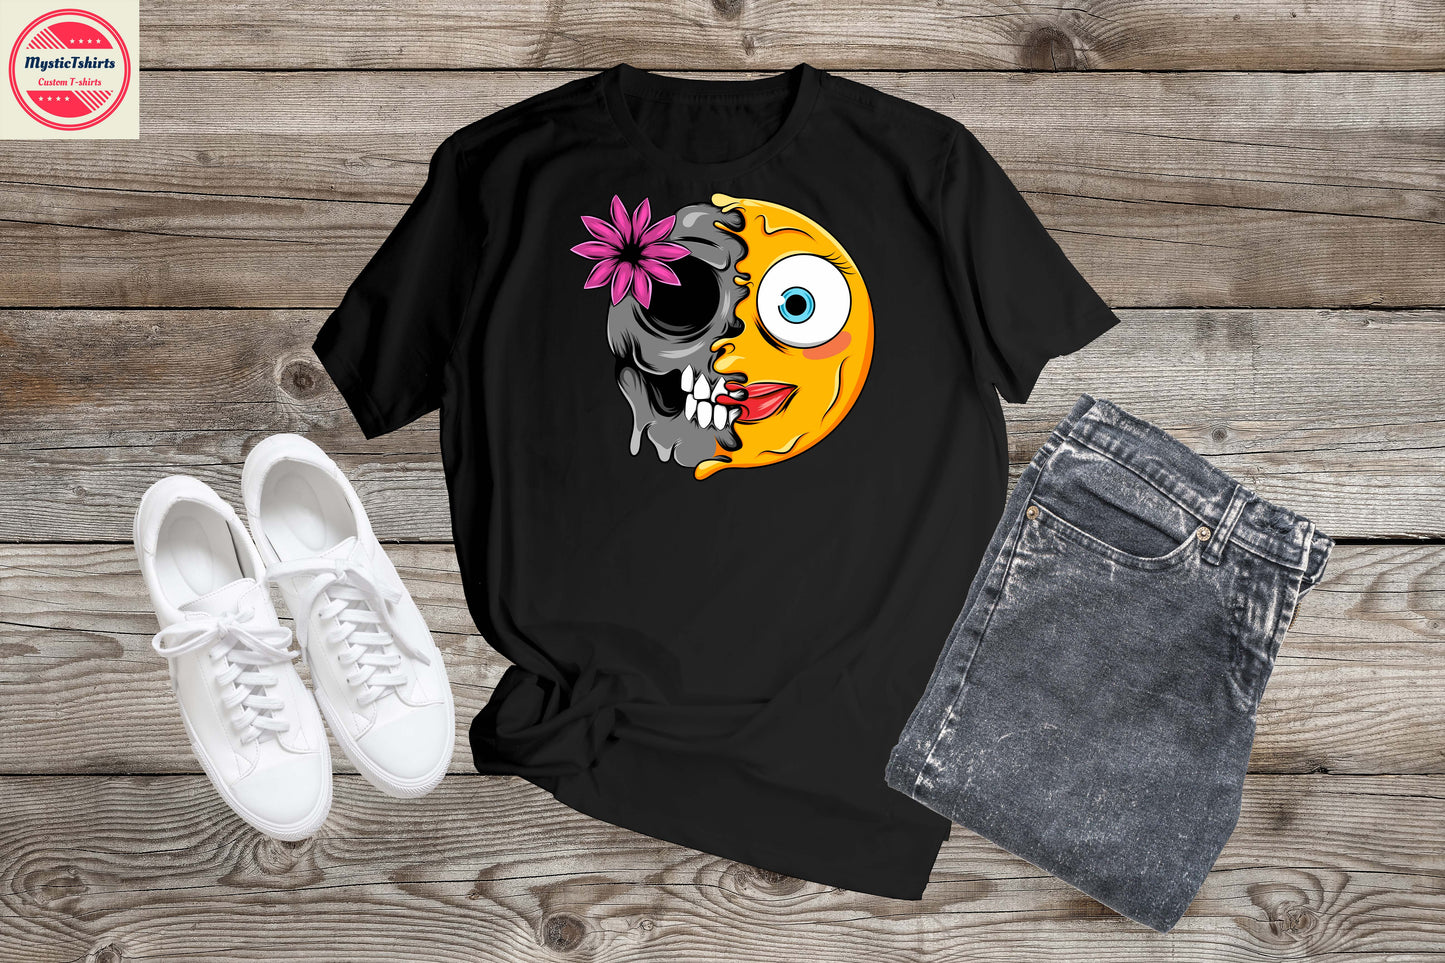 103. CRAZY FACE, Personalized T-Shirt, Custom Text, Make Your Own Shirt, Custom Tee